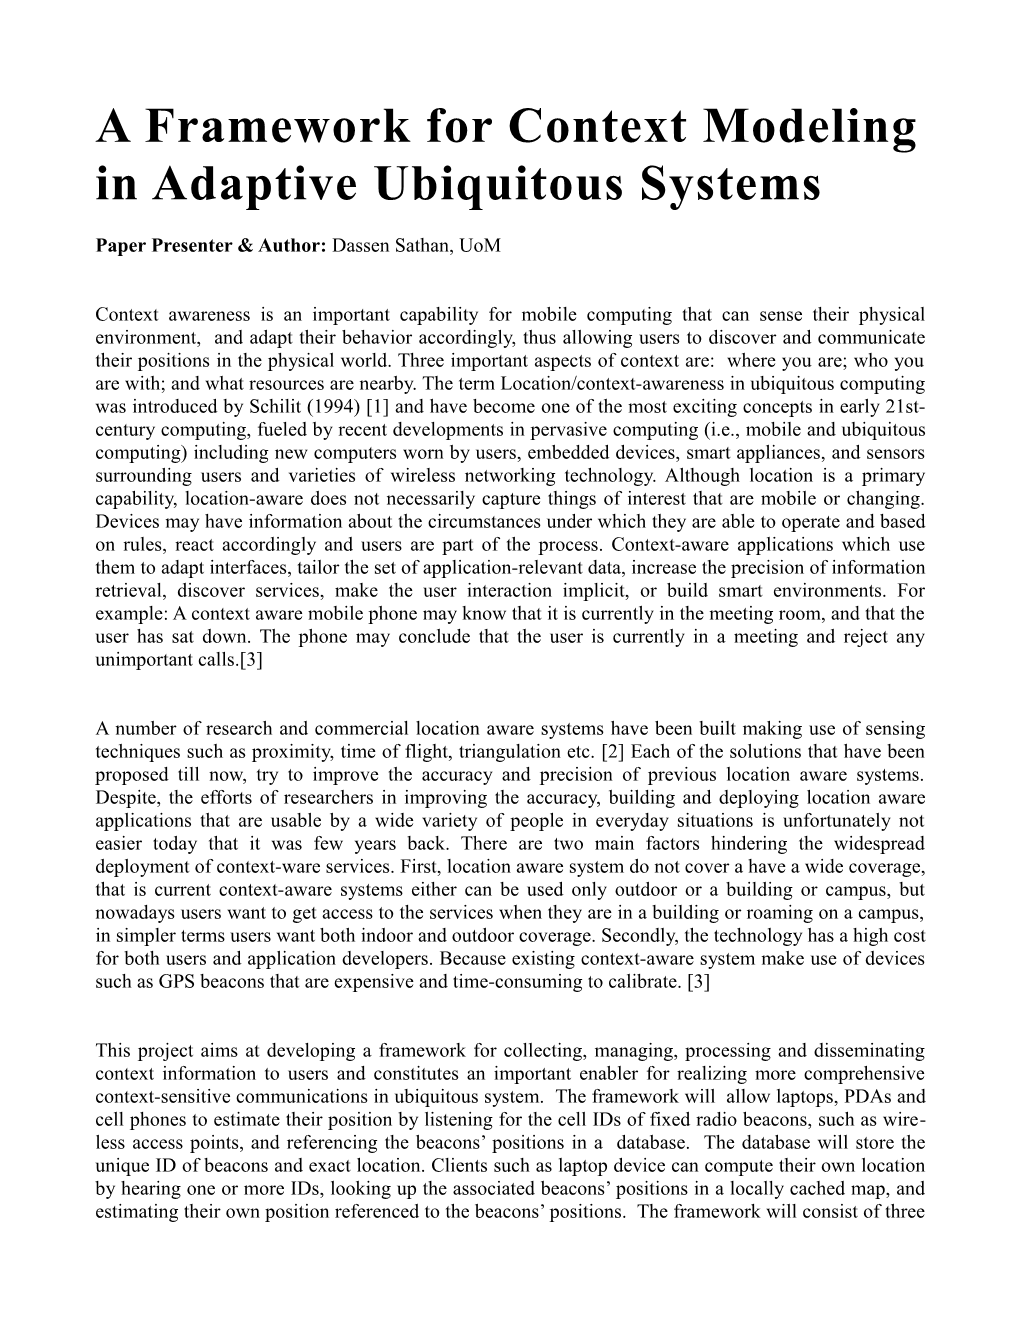 A Framework for Context Modeling in Adaptive Ubiquitous Systems